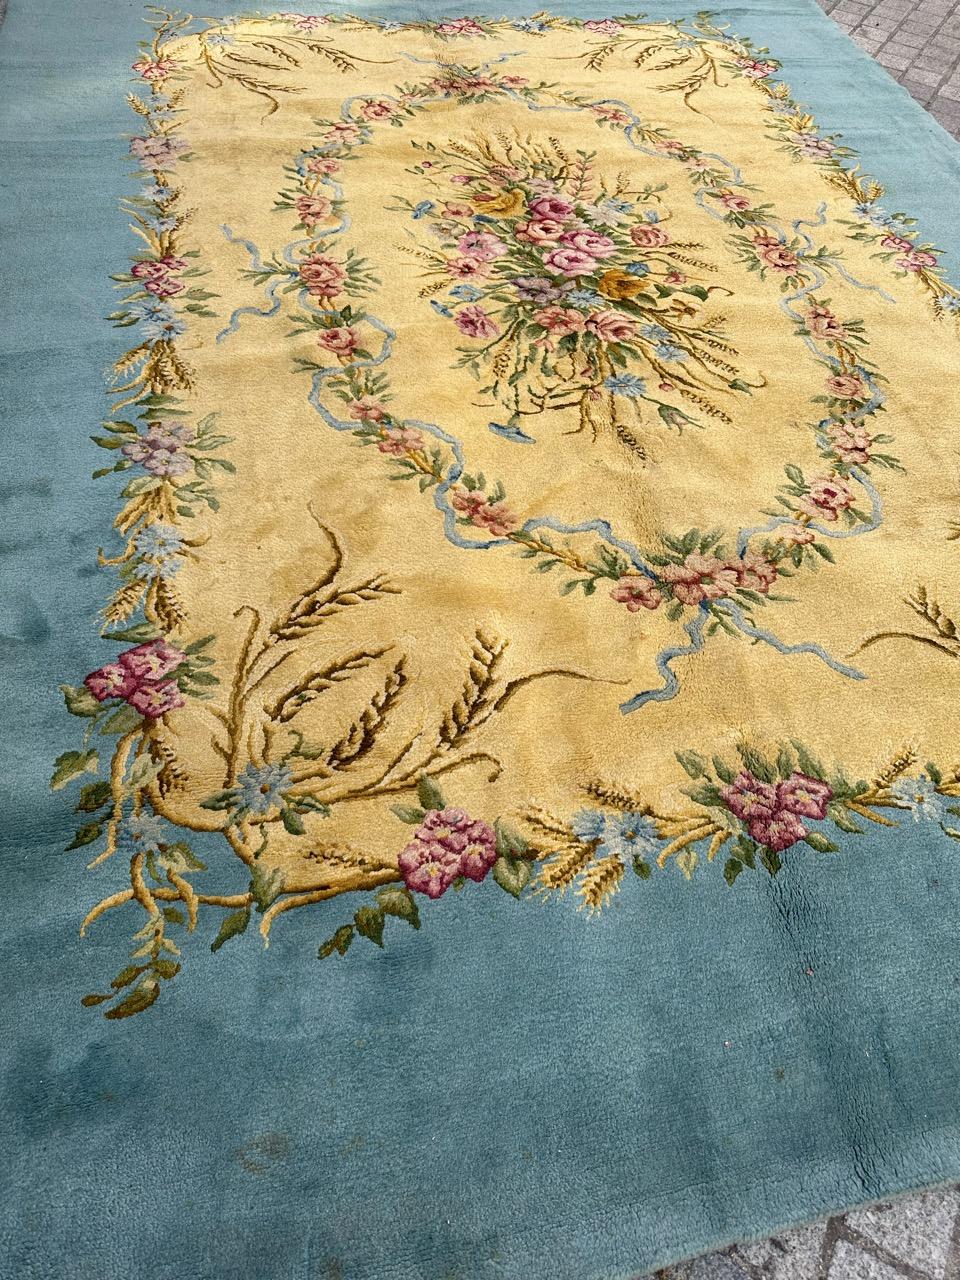 Introducing an exquisite antique French Savonnerie rug with a stunning floral design in the Napoleon III style. This exceptional piece features beautiful natural colors and is meticulously hand-knotted with wool velvet on a cotton foundation.